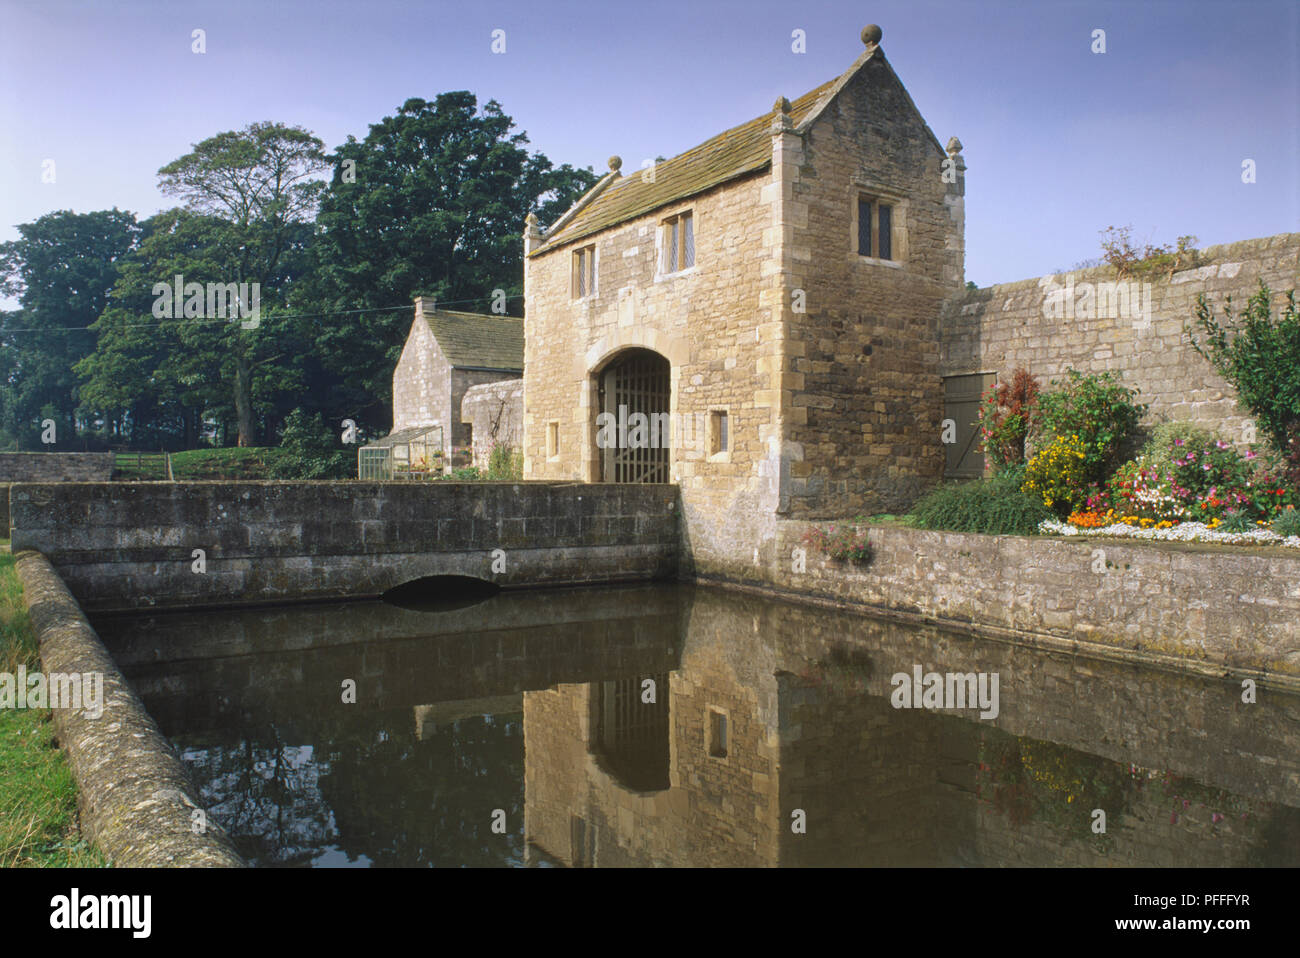 Great Britain, England, Yorkshire, a Tudor gatehouse surrounded by a moat. Stock Photo